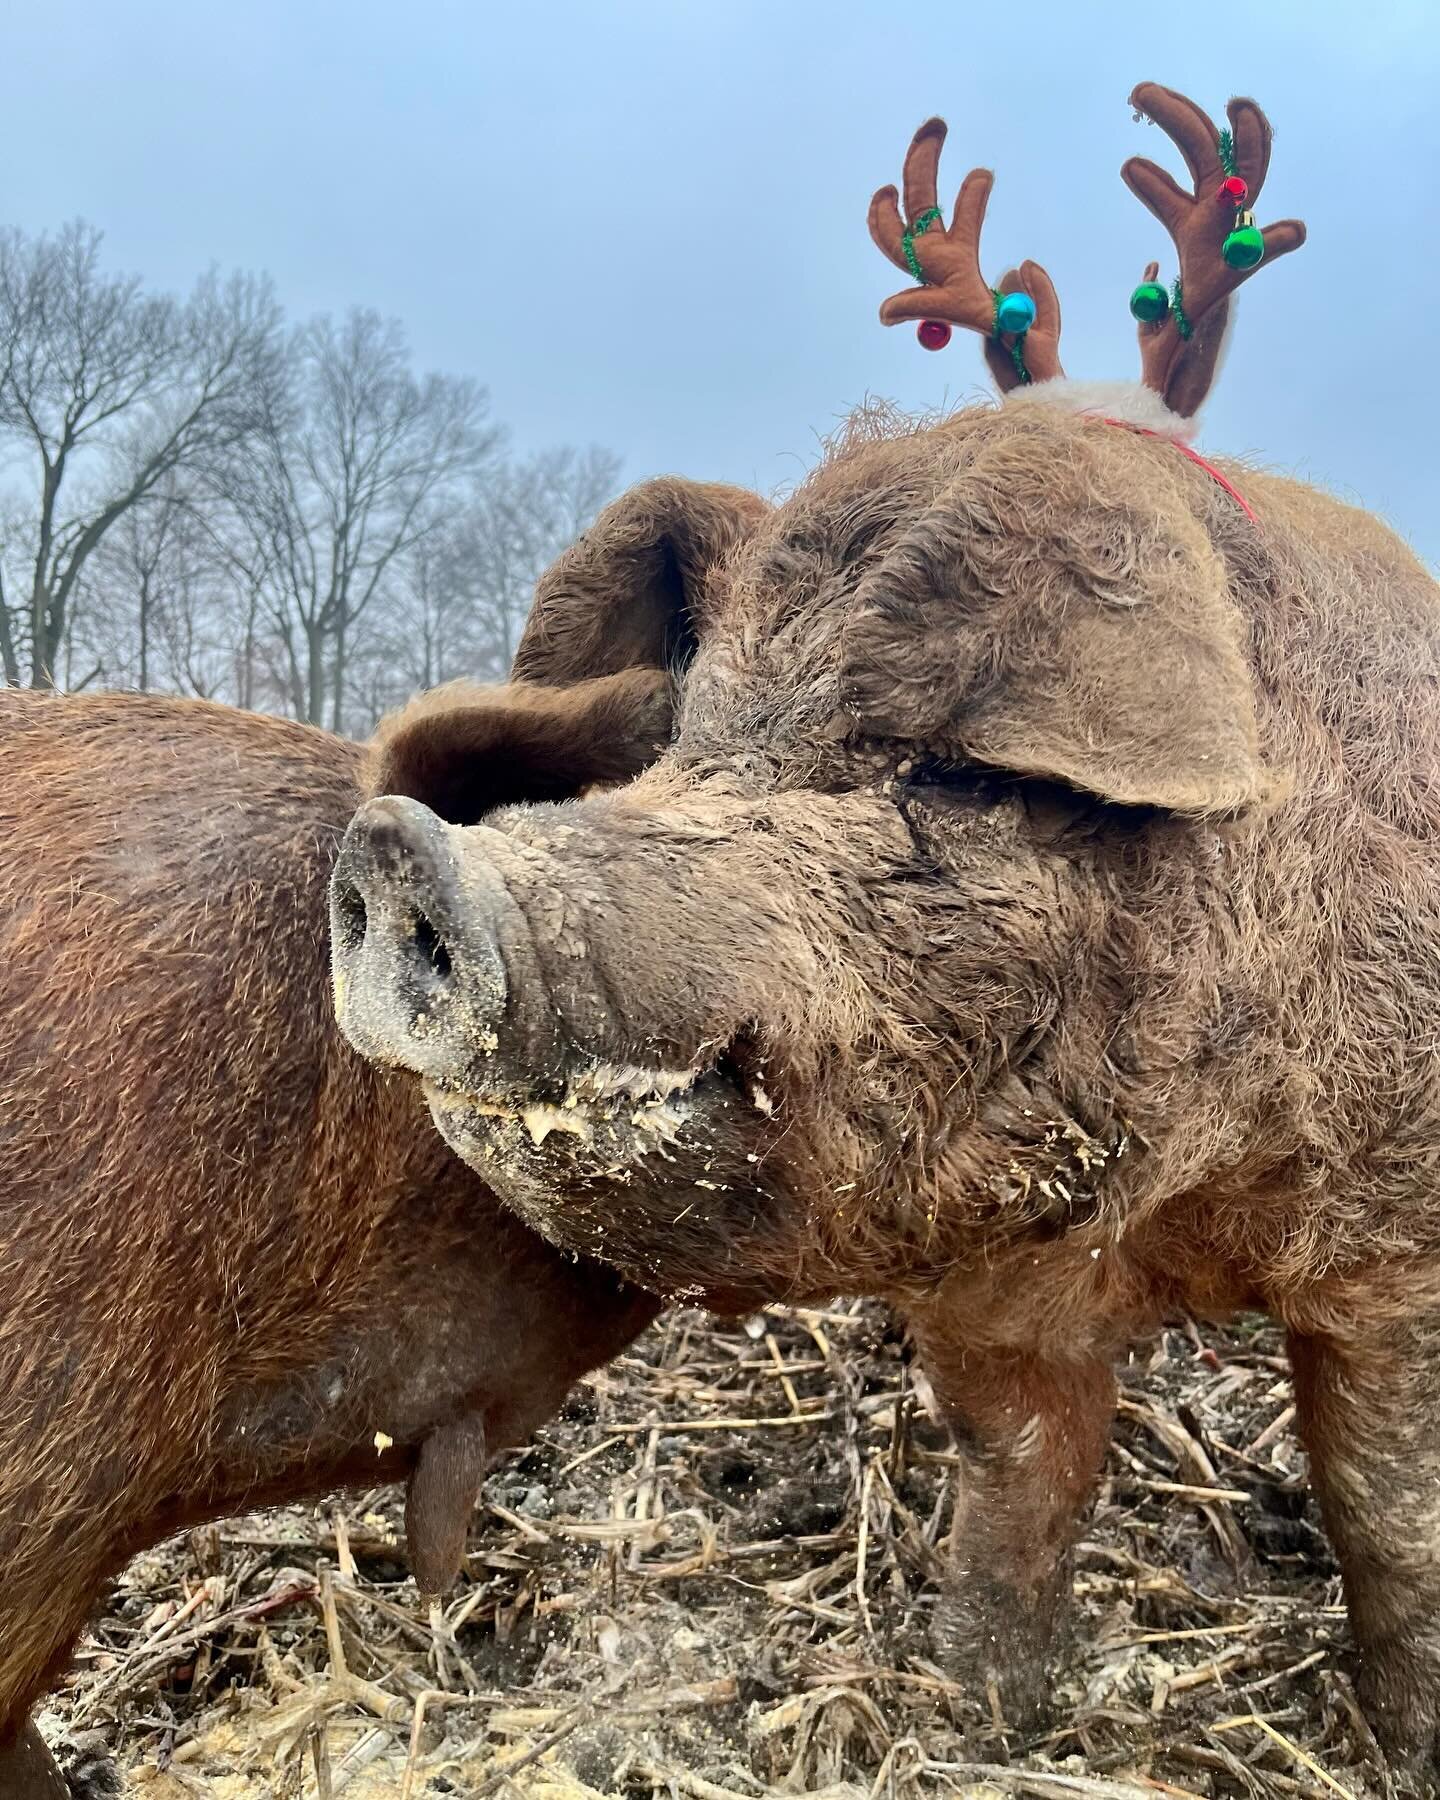 Merry Christmas ya filthy animals.  That&rsquo;s a compliment in swine speak! 

Busy and abundant on the farm these days, racing to build greenhouses so we can get our plants started on time and grow some delicious food for you all. 

Wishing you the